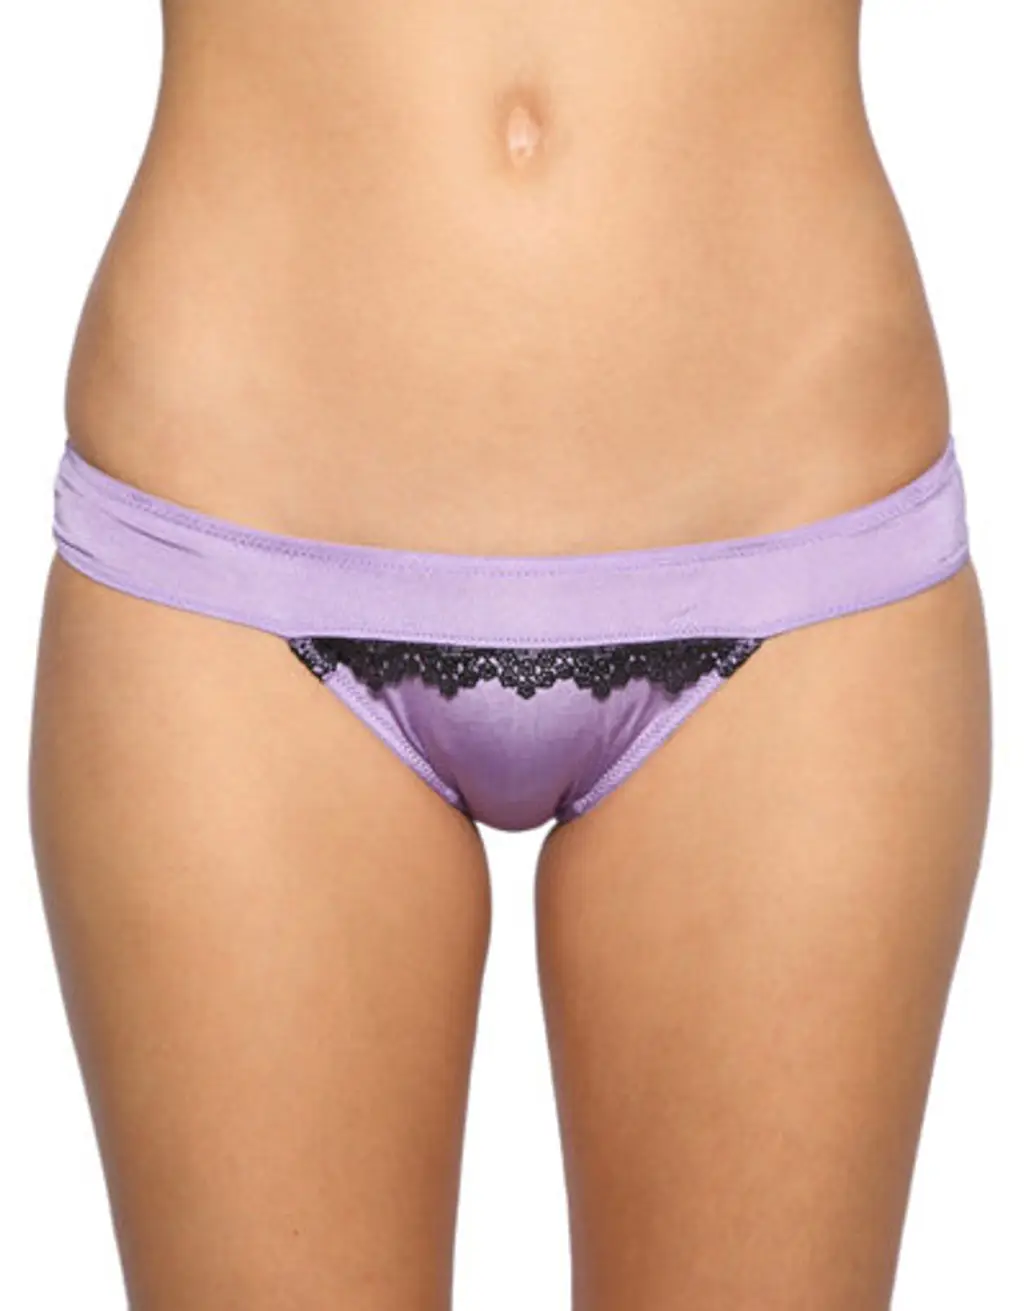 B’Tempt’D “All Dolled up” Satin Briefs